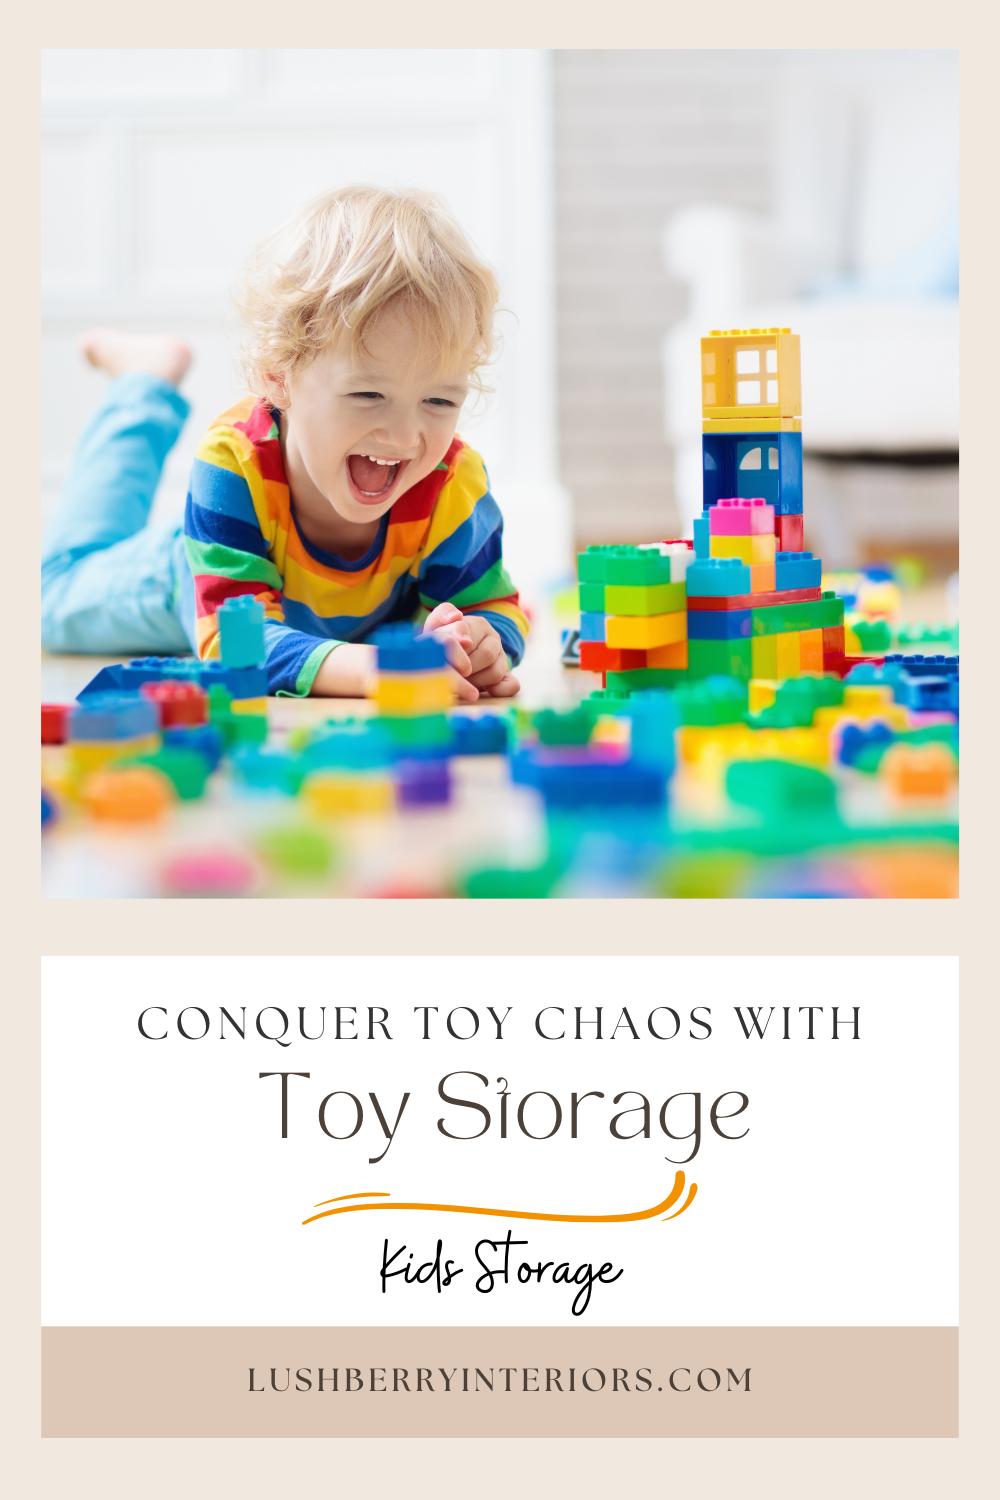 Conquer Toy Chaos: 10 Must-Try Toy Storage Hacks